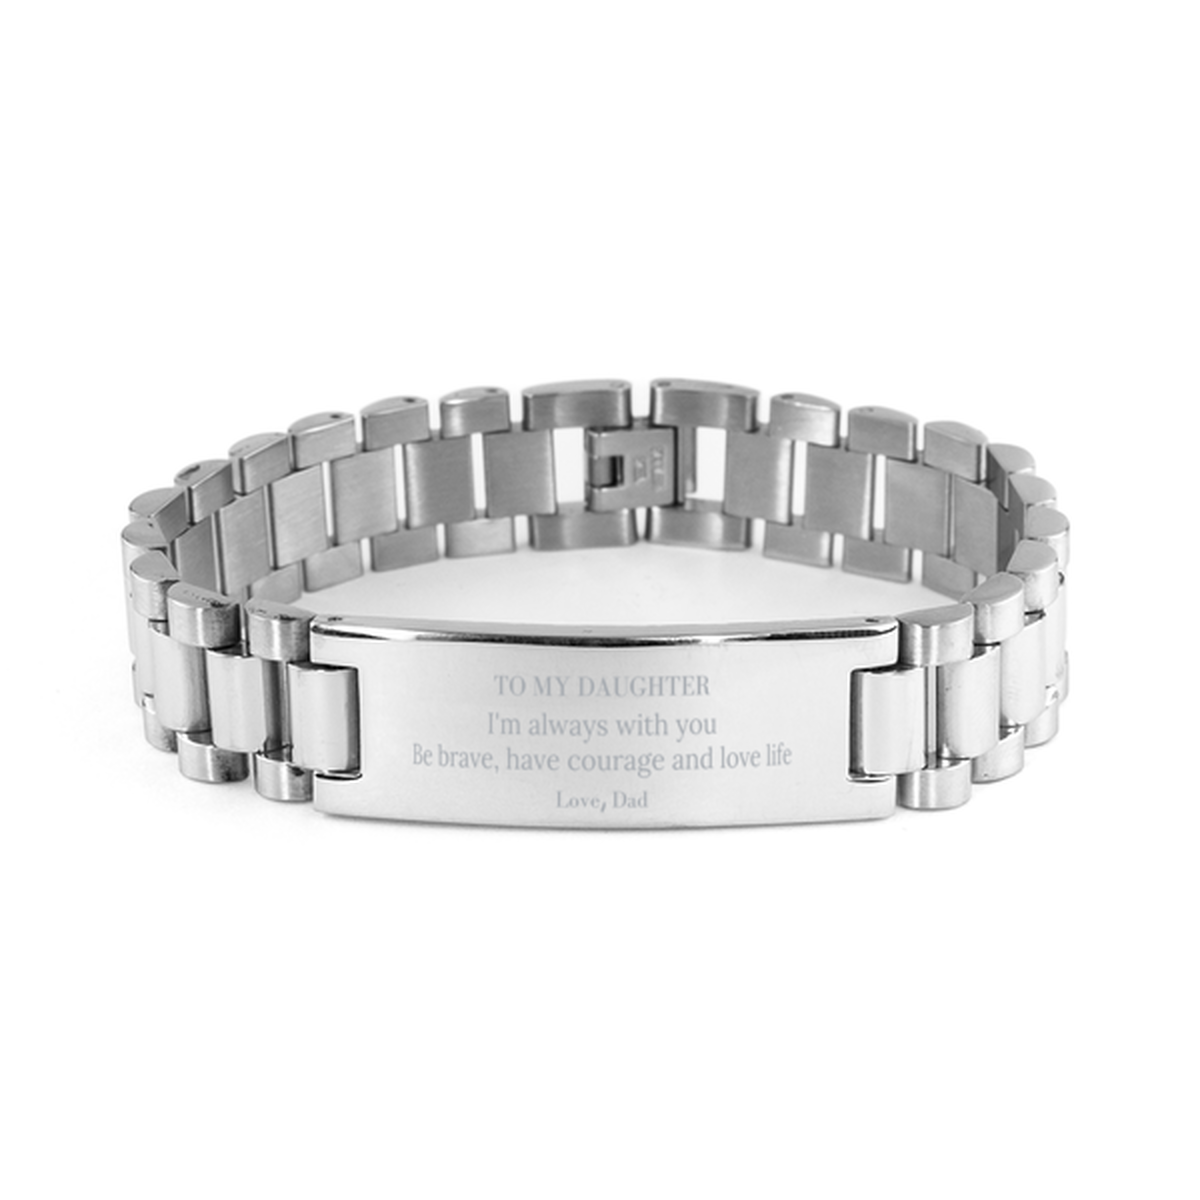 To My Daughter Gifts from Dad, Unique Ladder Stainless Steel Bracelet Inspirational Christmas Birthday Graduation Gifts for Daughter I'm always with you. Be brave, have courage and love life. Love, Dad